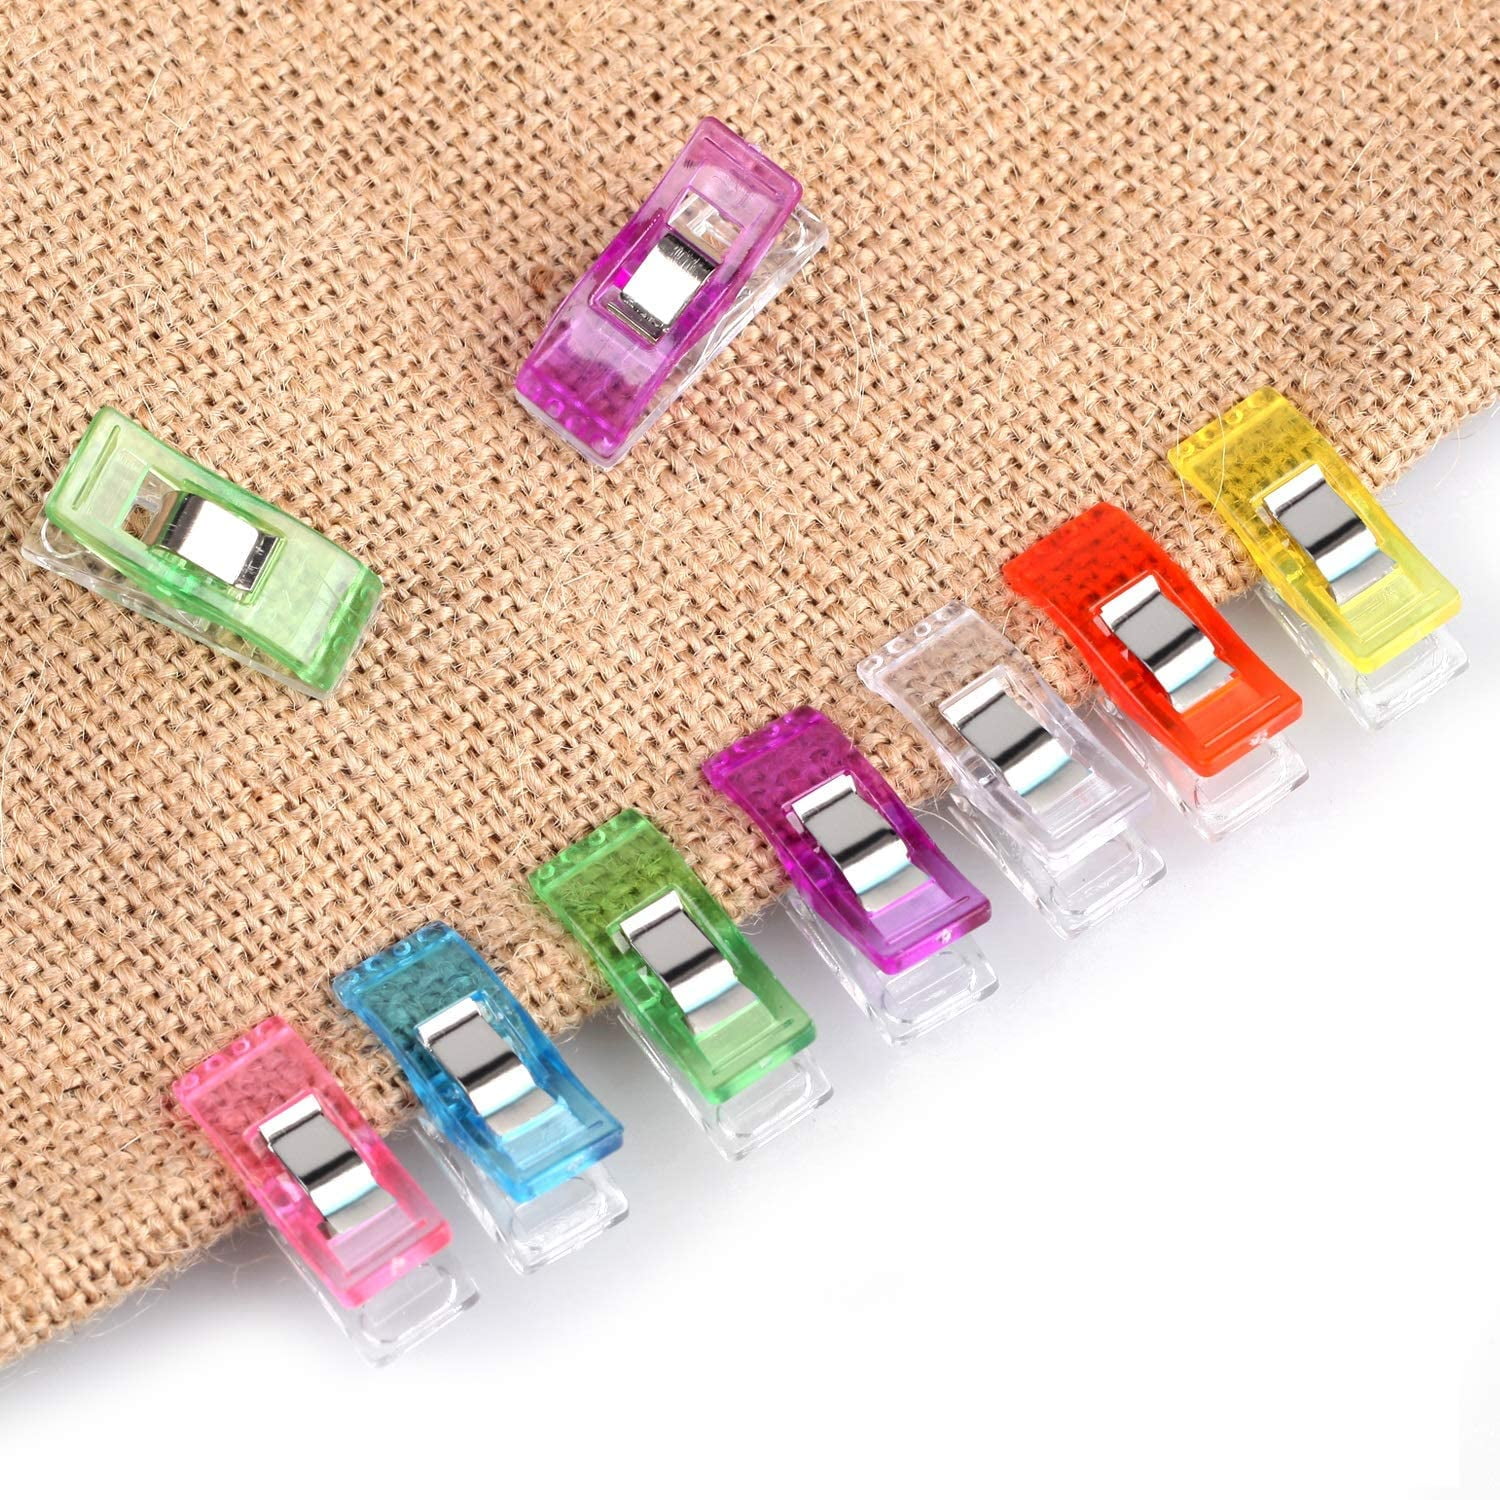 20pcs Sewing Clips Muti-Colored Quilting Clips Binding Clips No Pins Clips Plastic Clips for Crafting Crocheting Knitting 